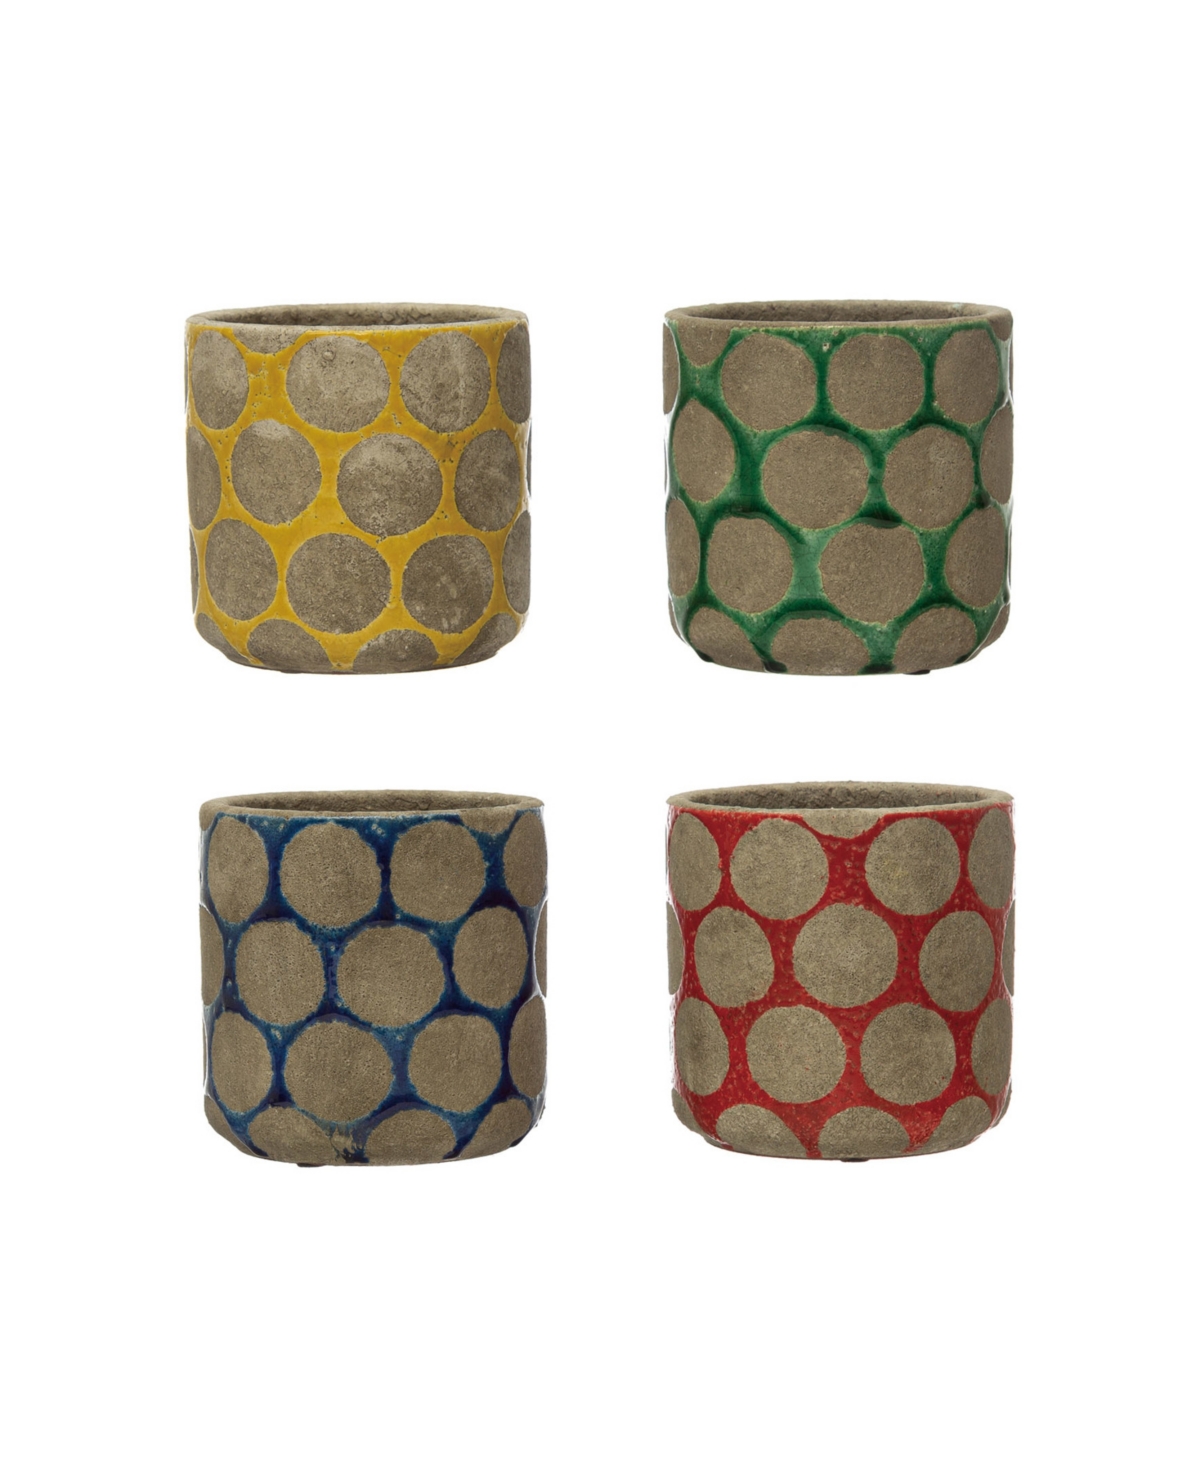 Terra-Cotta Planter with Wax Relief Dots, Set of 4 Colors - Multicolored